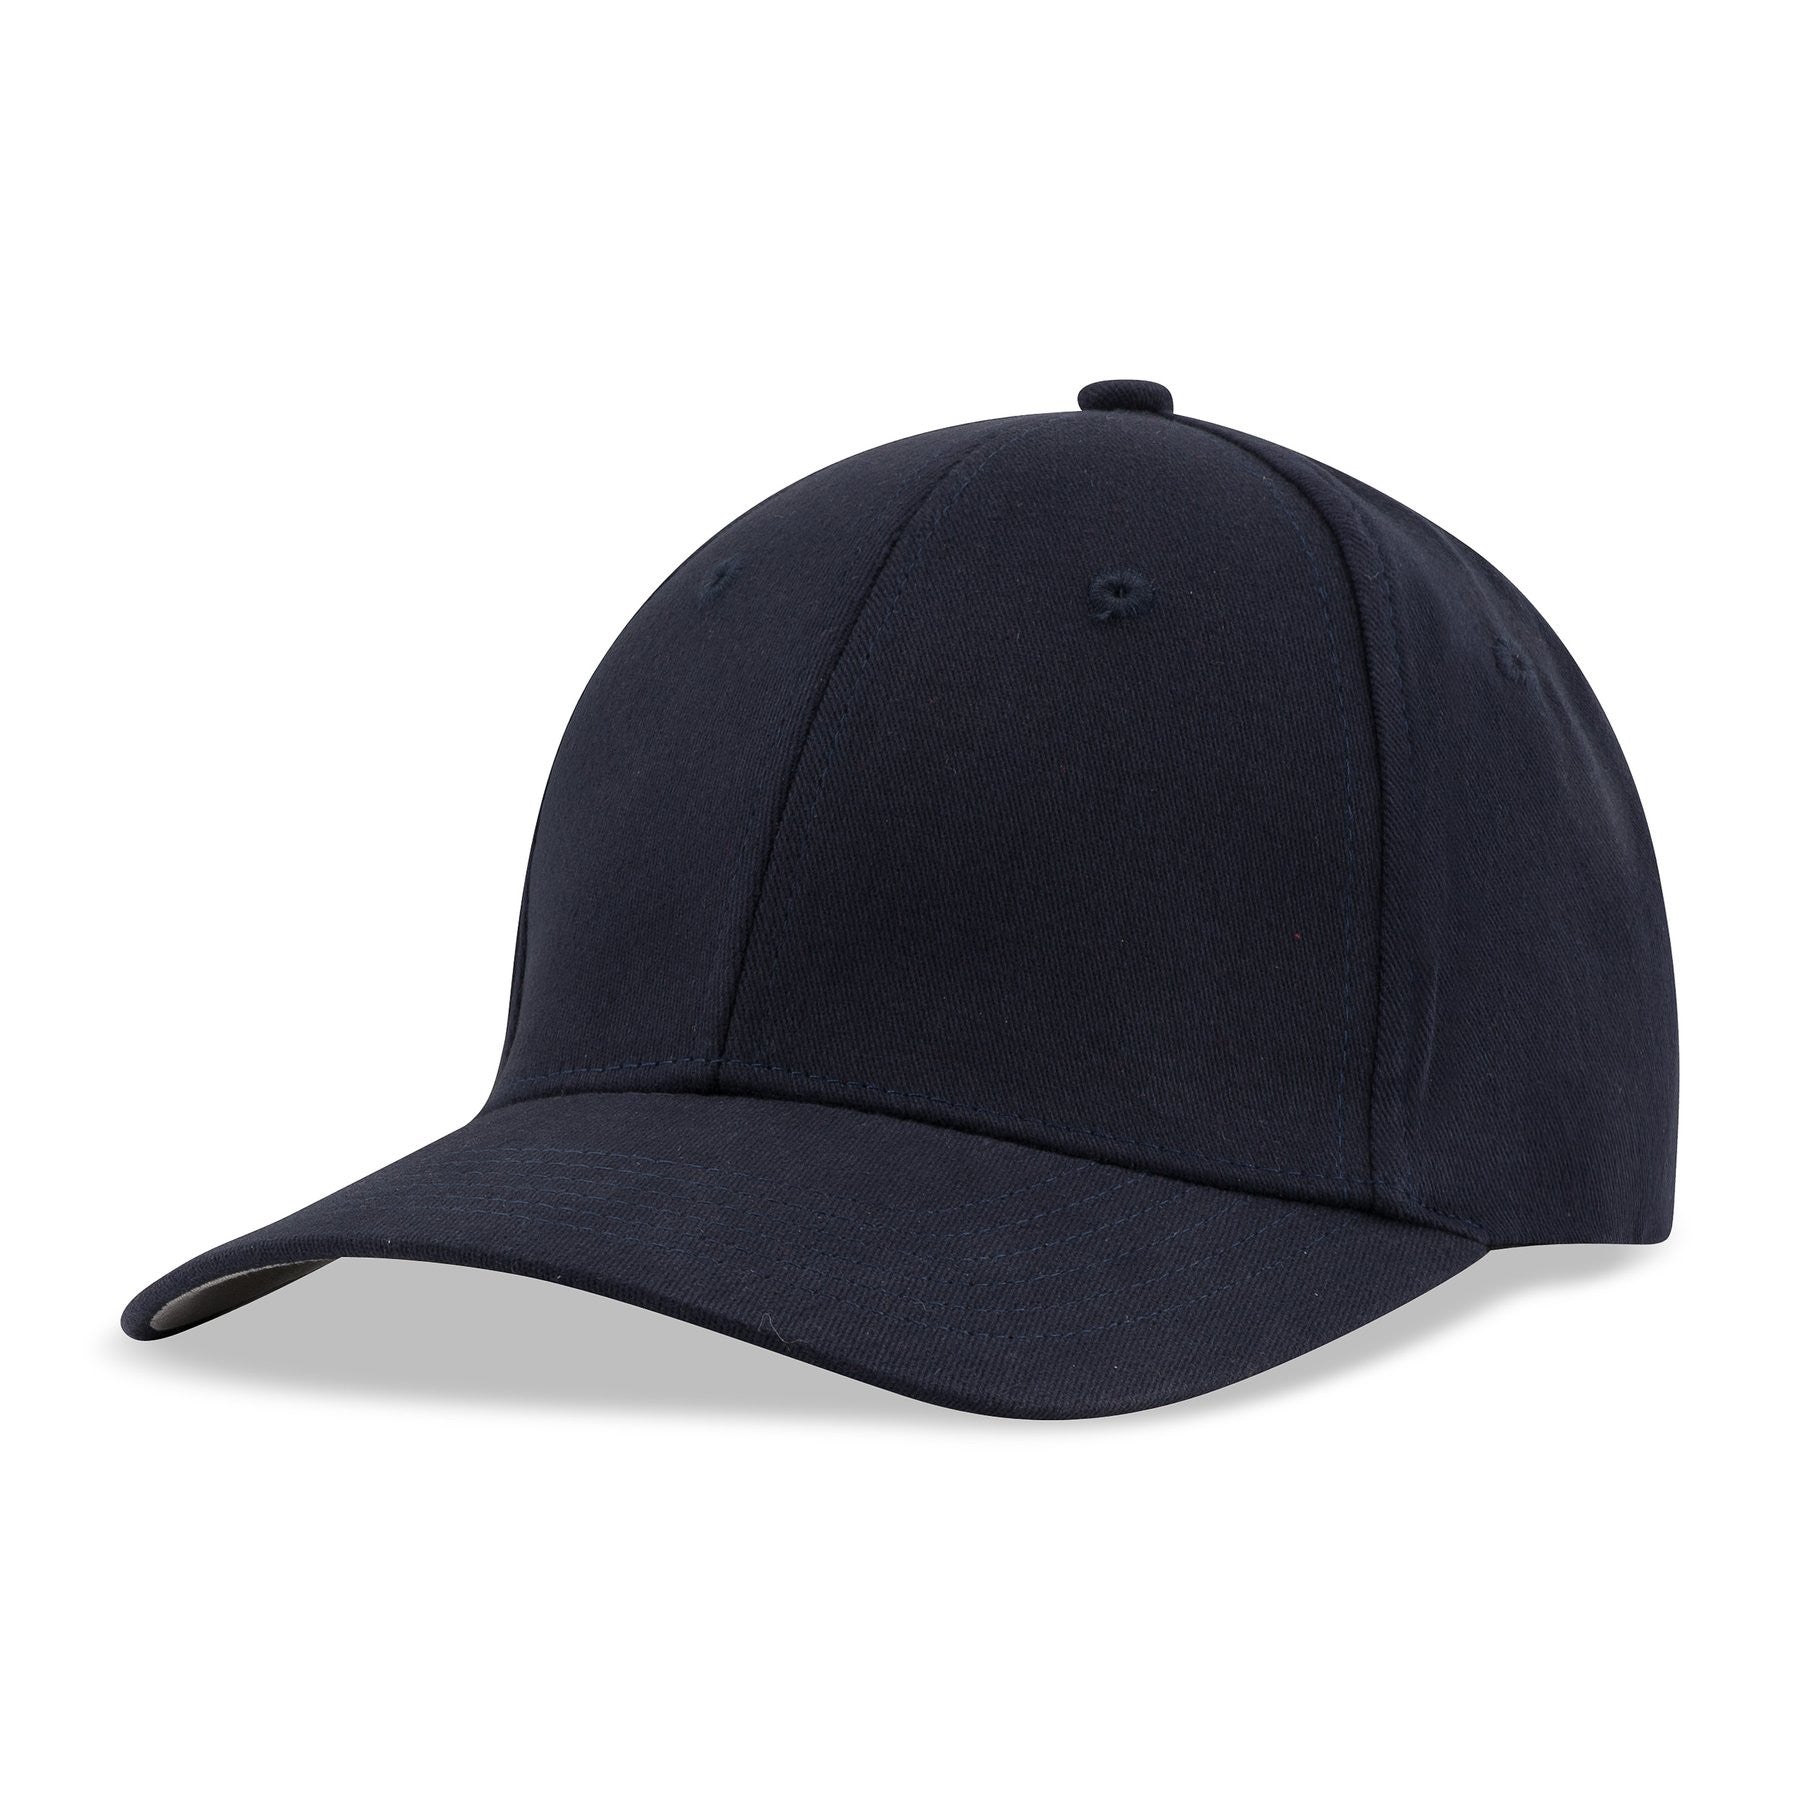 3000 Nu-Fit Pro-Style Cotton Spandex Fitted Cap - Budget Promotion Headware CA$ 18.39 Navy